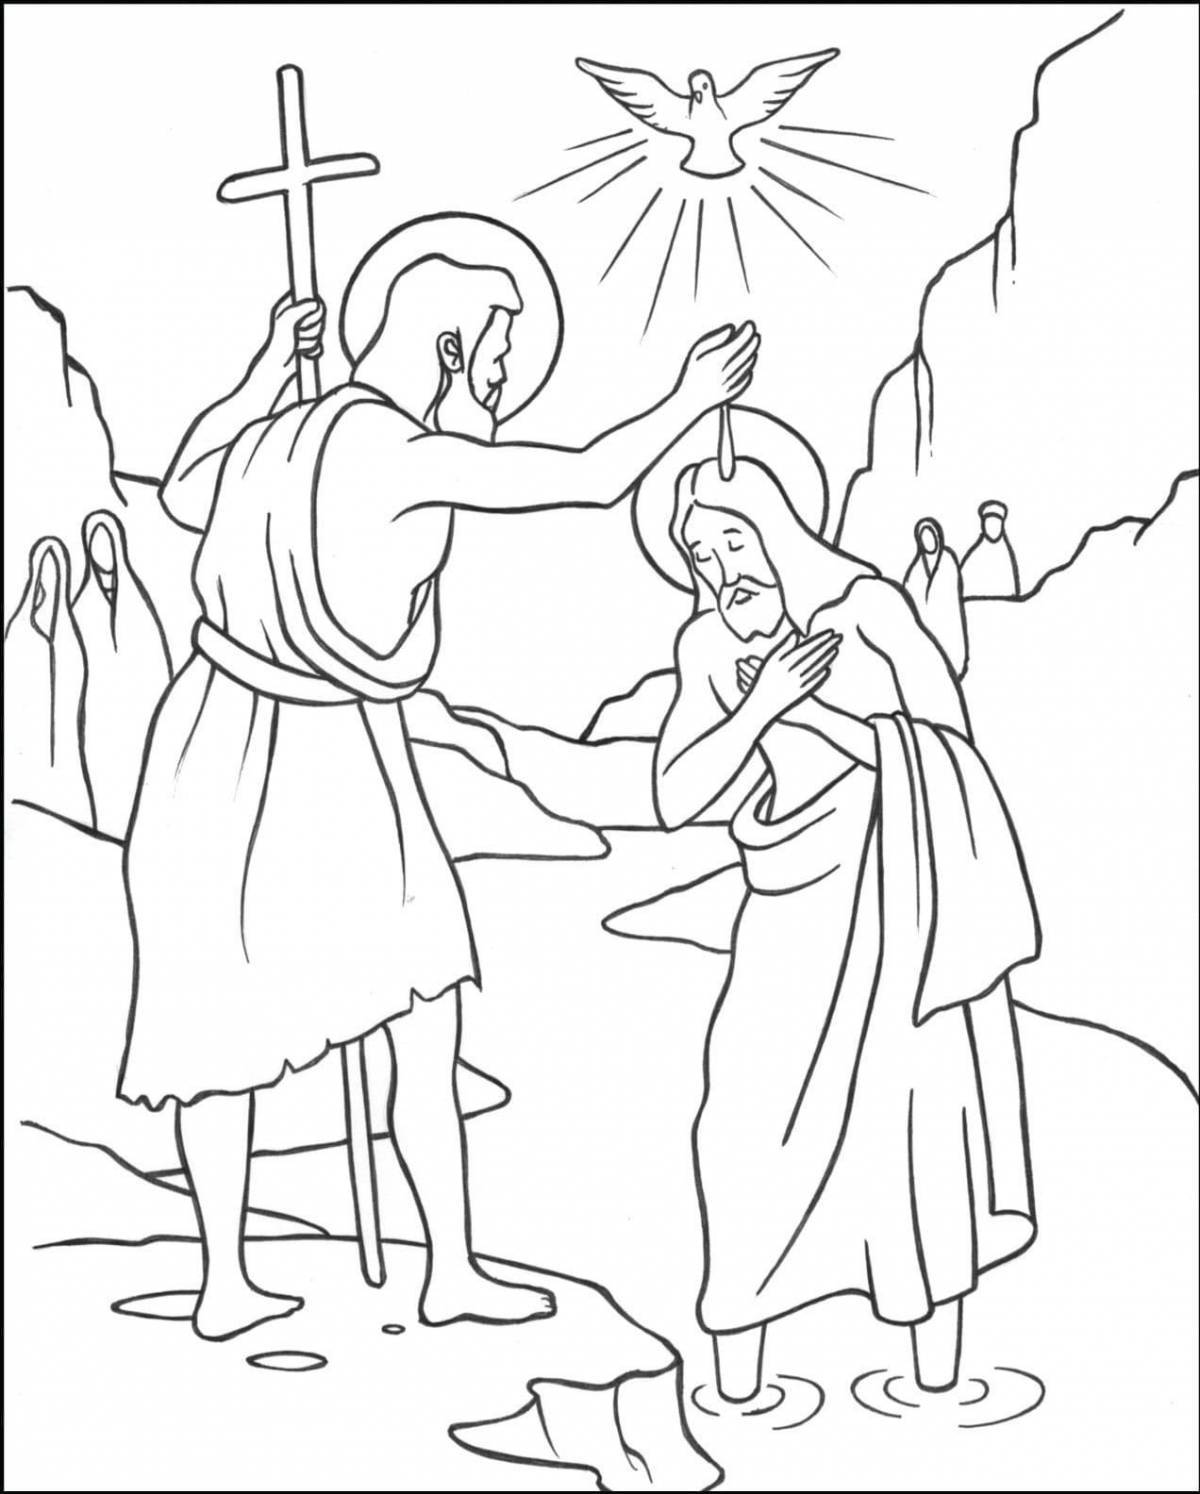 Adorable baptism coloring book for kids